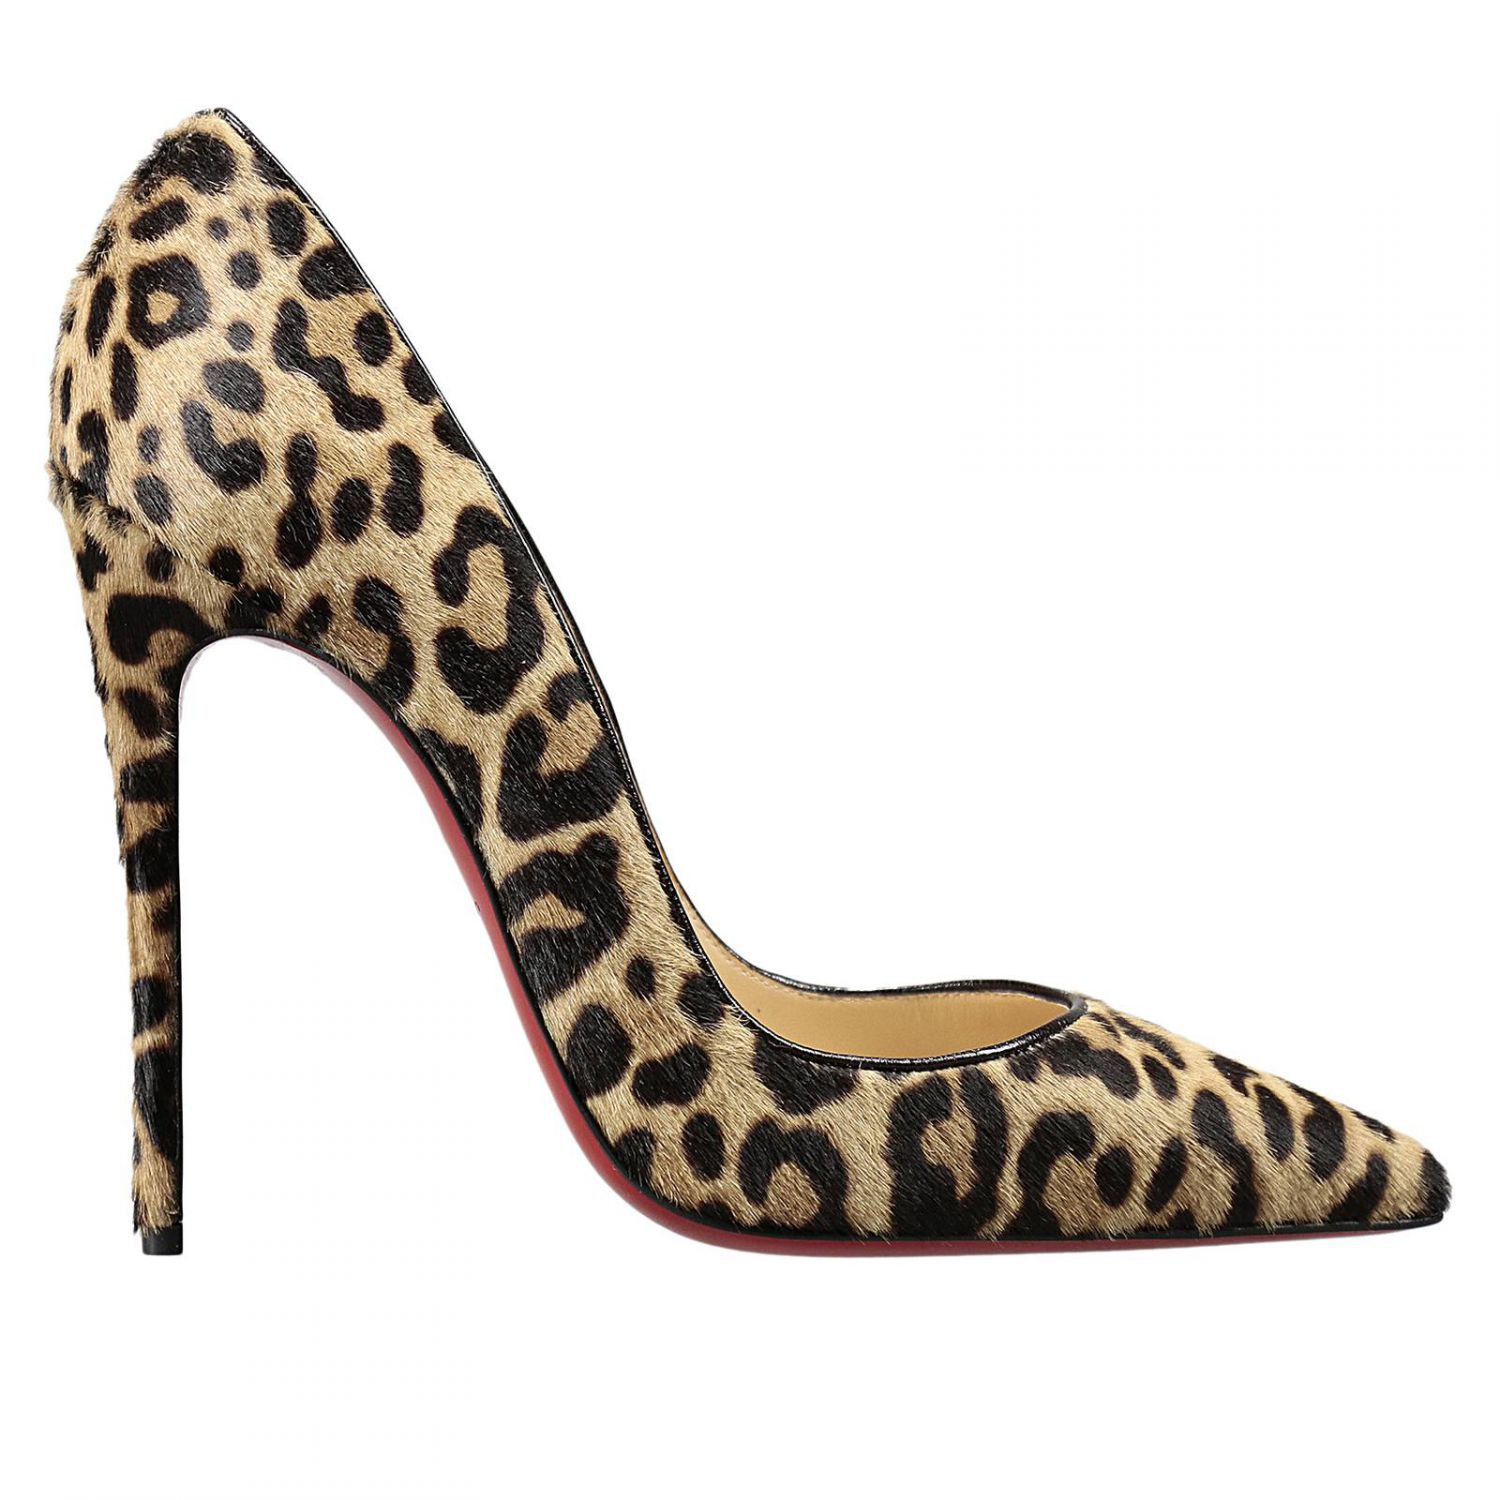 christian louboutin pointed-toe pumps Tan and brown ponyhair ...  